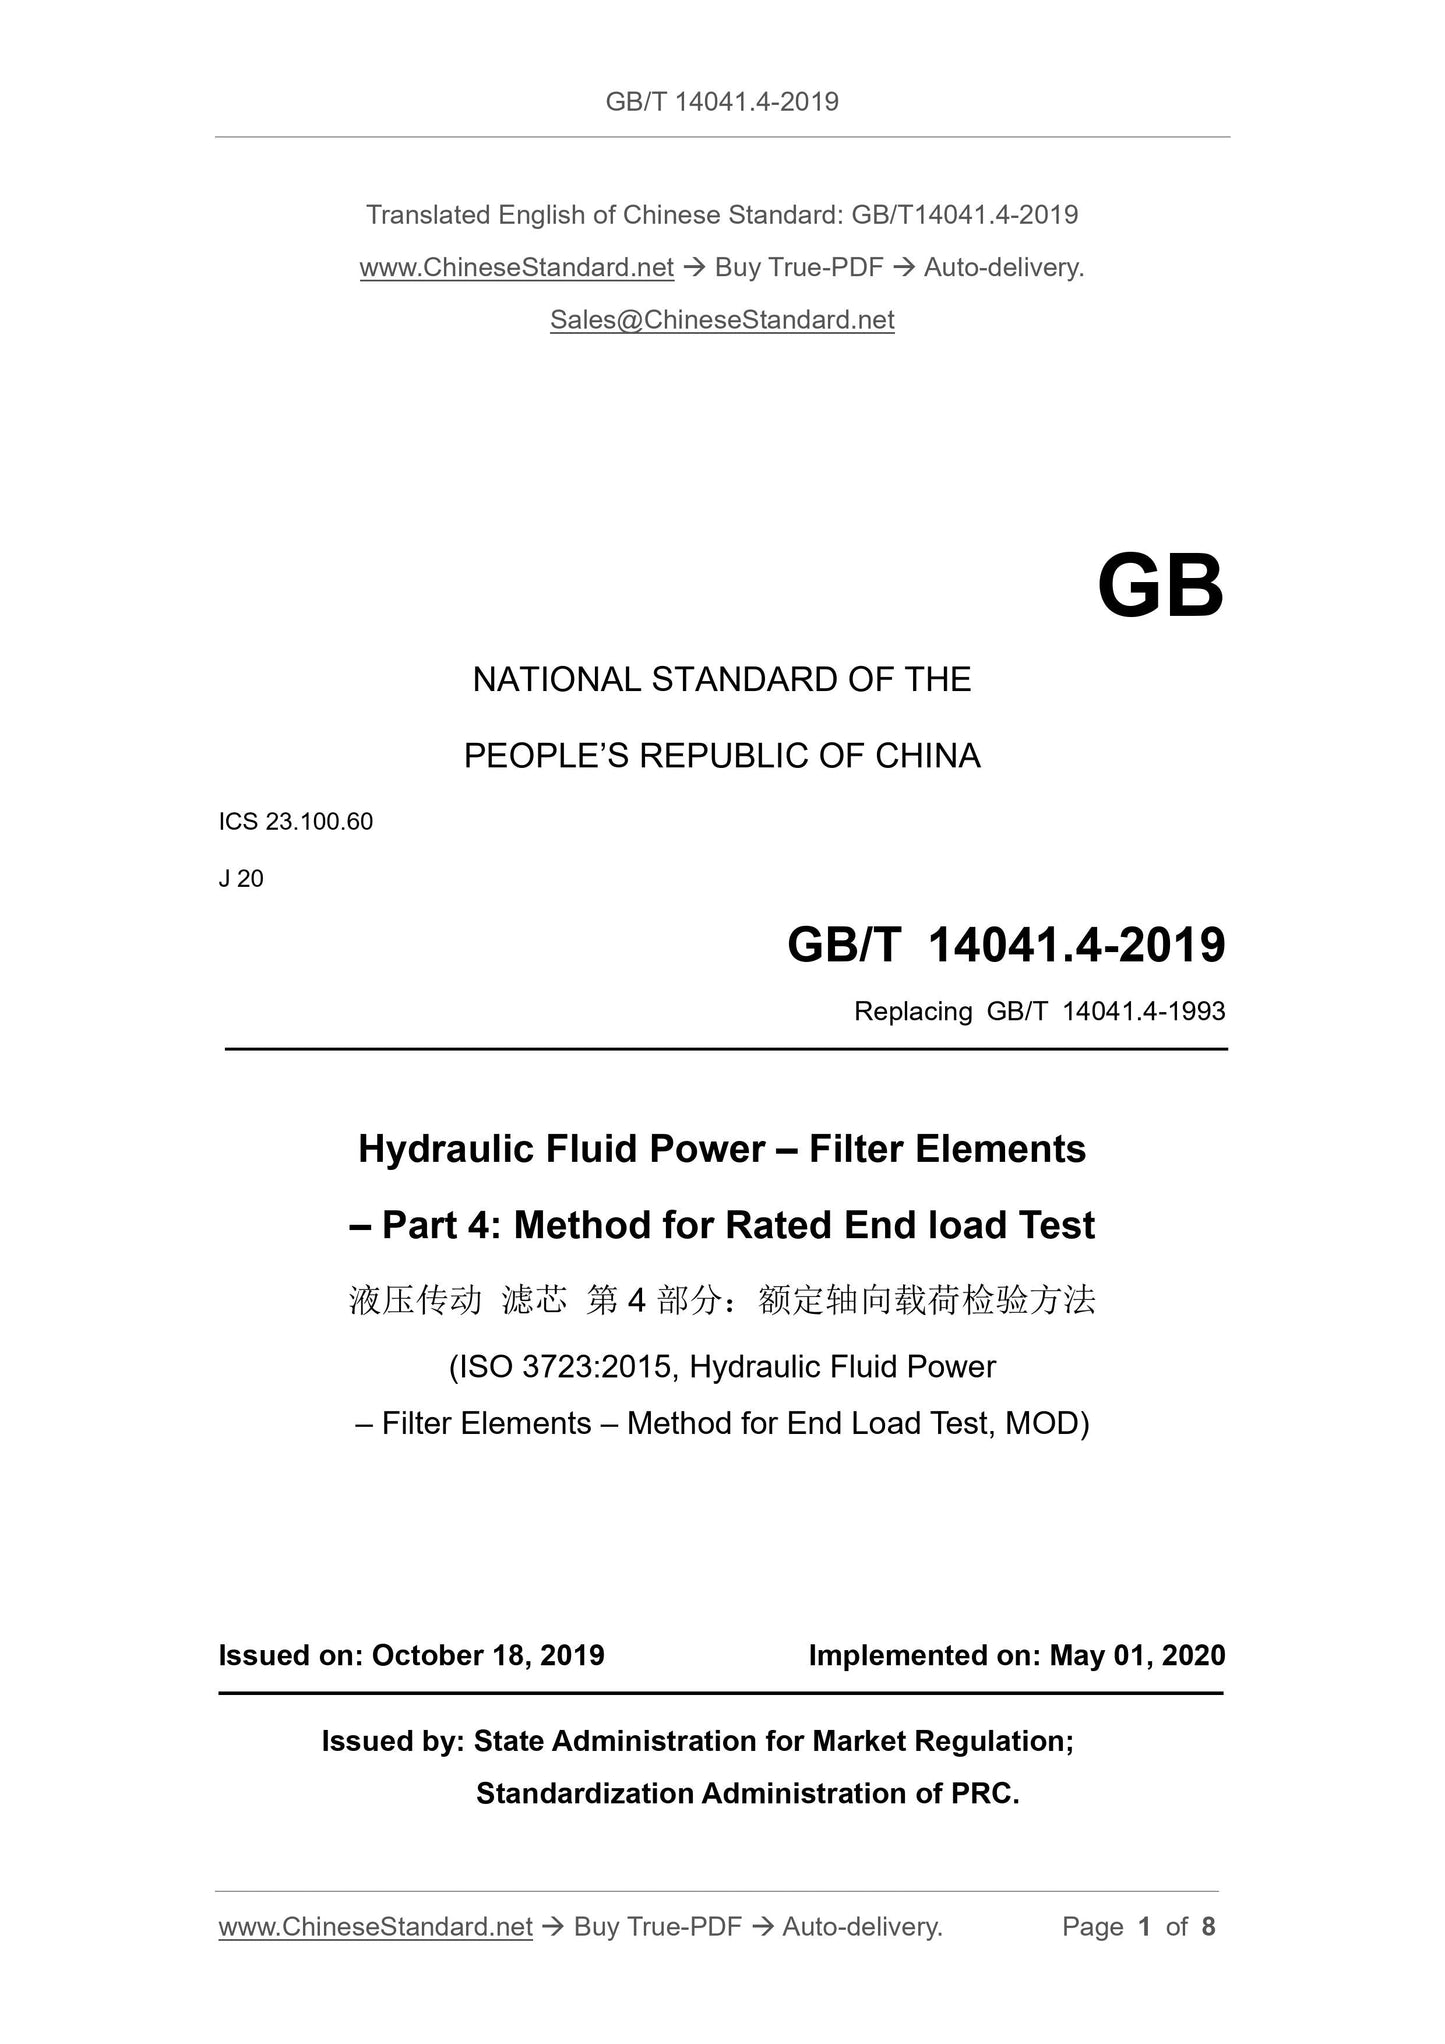 GB/T 14041.4-2019 Page 1